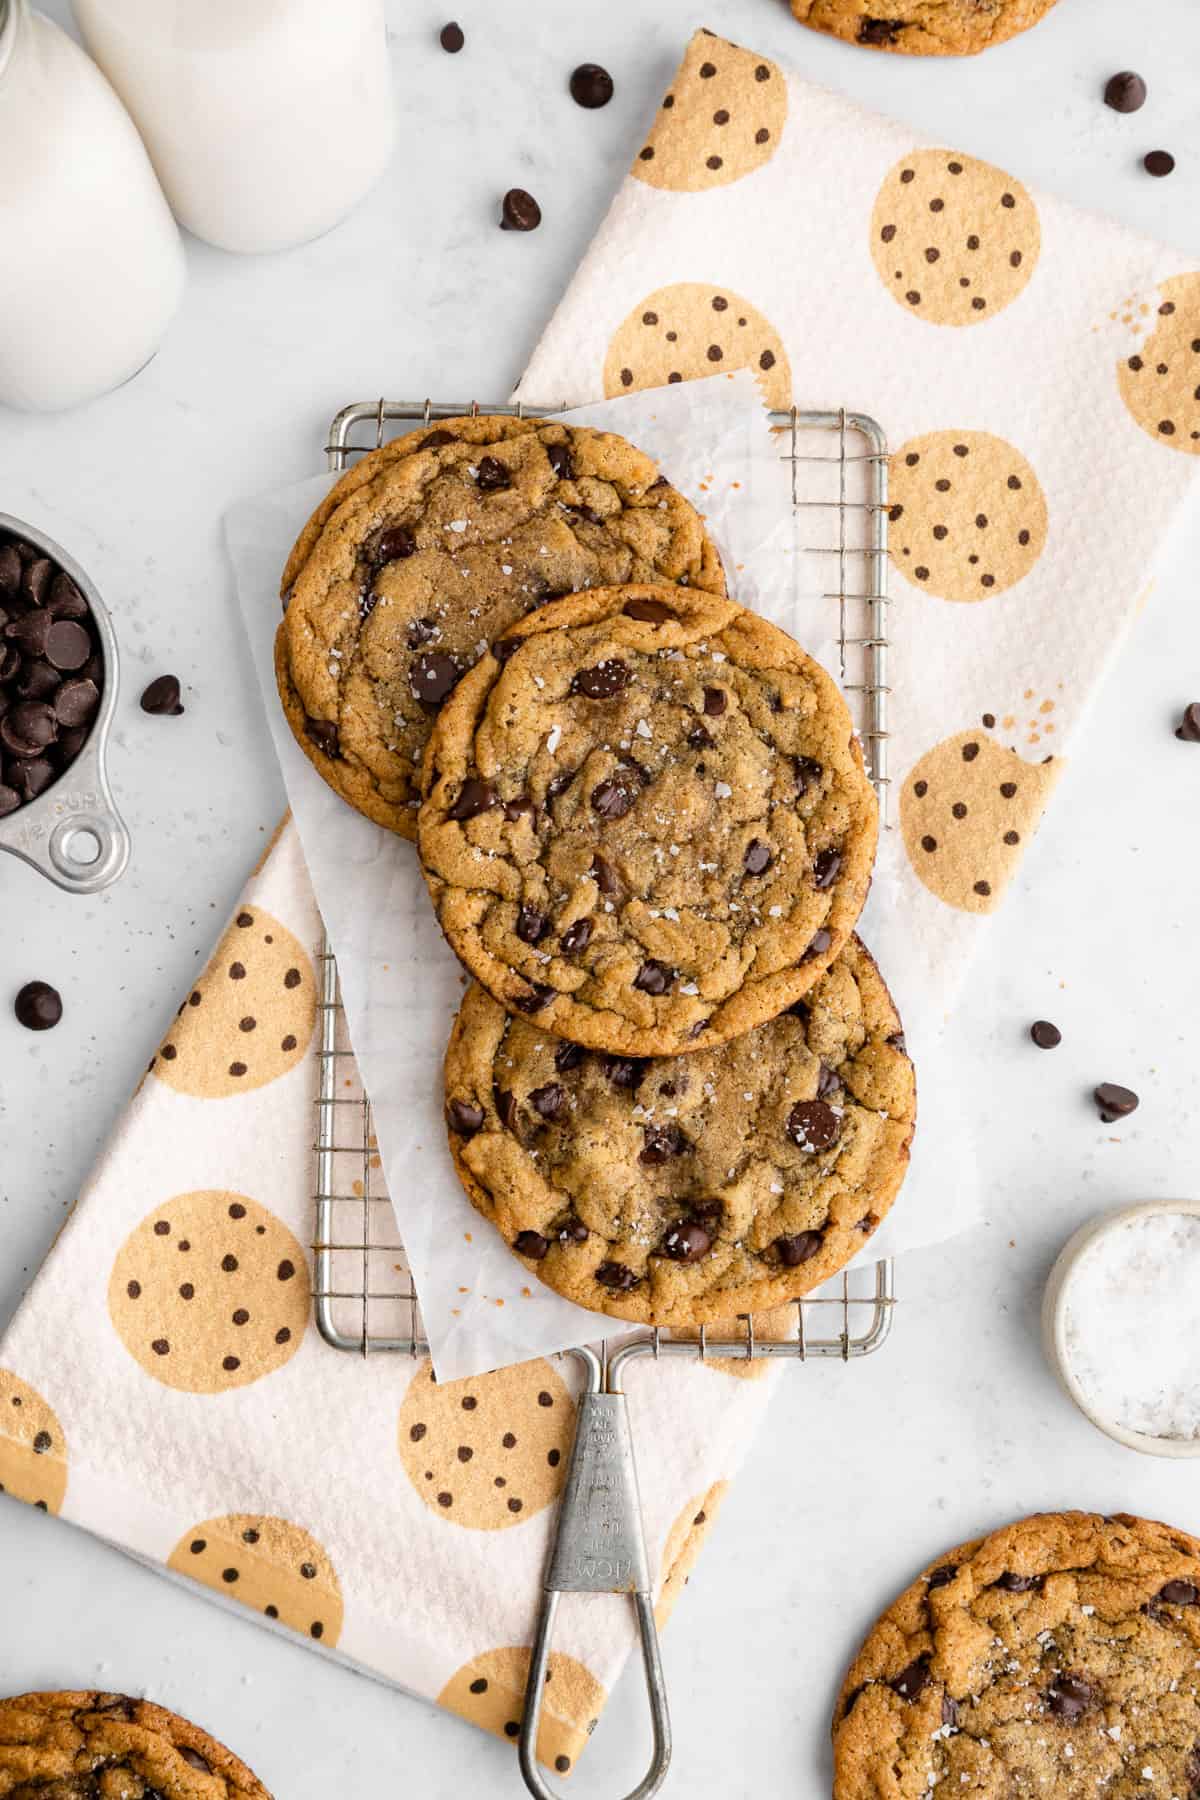 three chocolate chip cookies beside a geometry kitchen towel